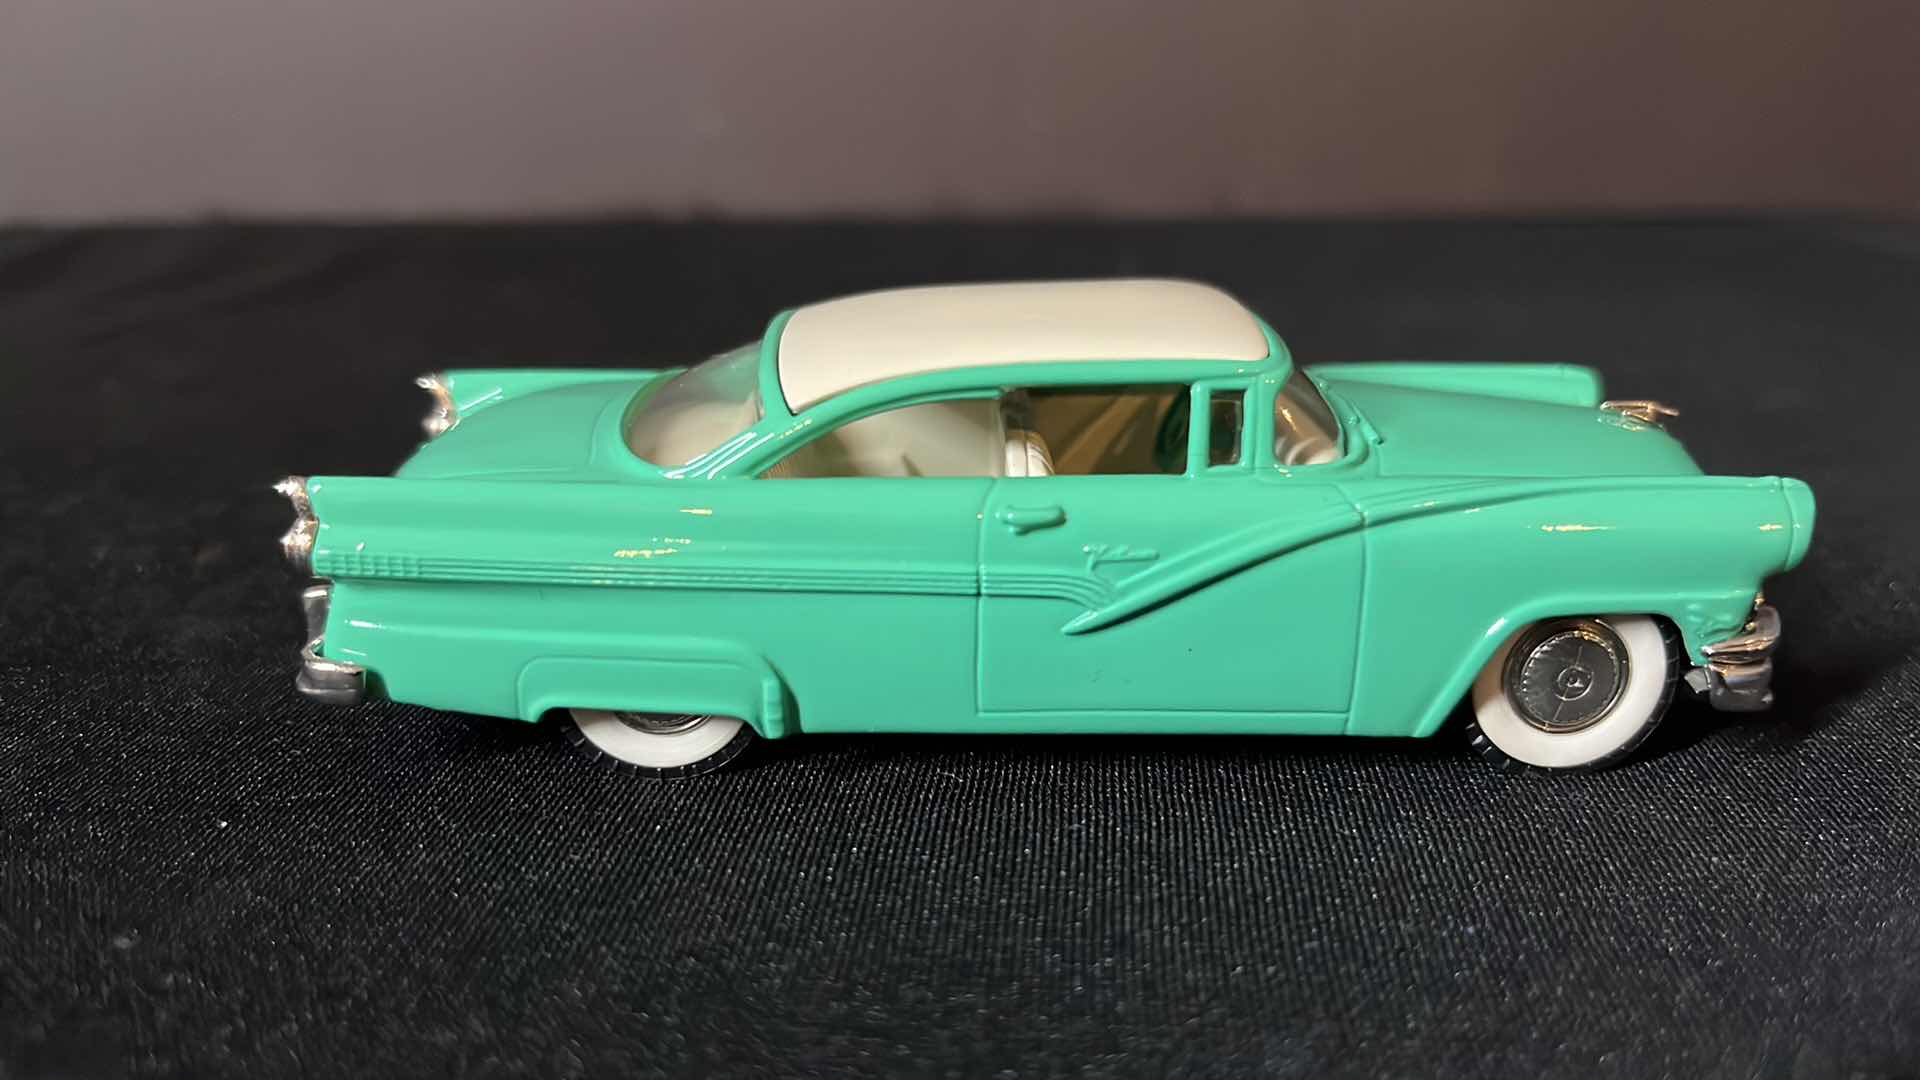 Photo 3 of VINTAGE BROOKLIN COLLECTION DIE-CAST METAL 1956 FORD FAIRLANE 2 DOOR VICTORIA, MADE IN ENGLAND (No. 23)